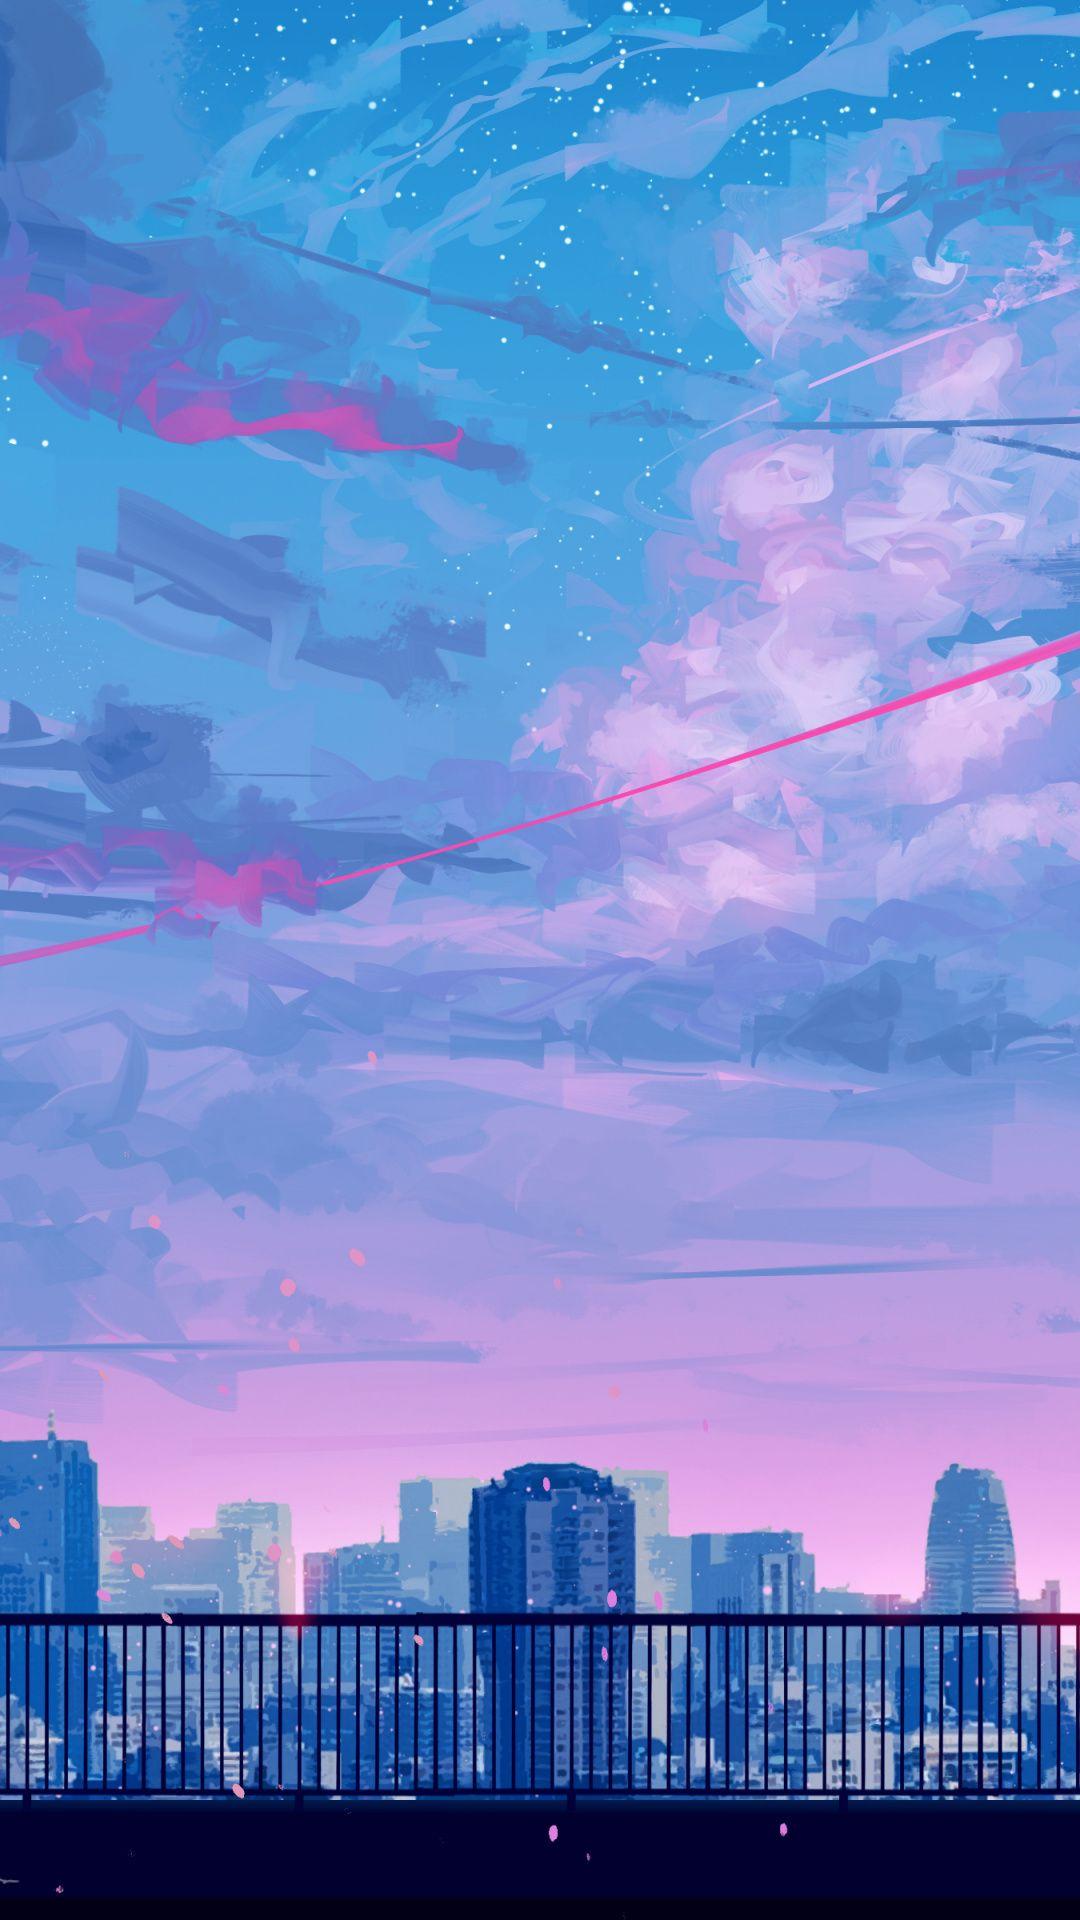 Lets go home, cityscape, bicycle ride, sunset, clouds, art, 1080x1920 wallpaper. Scenery wallpaper, Anime scenery, Anime scenery wallpaper